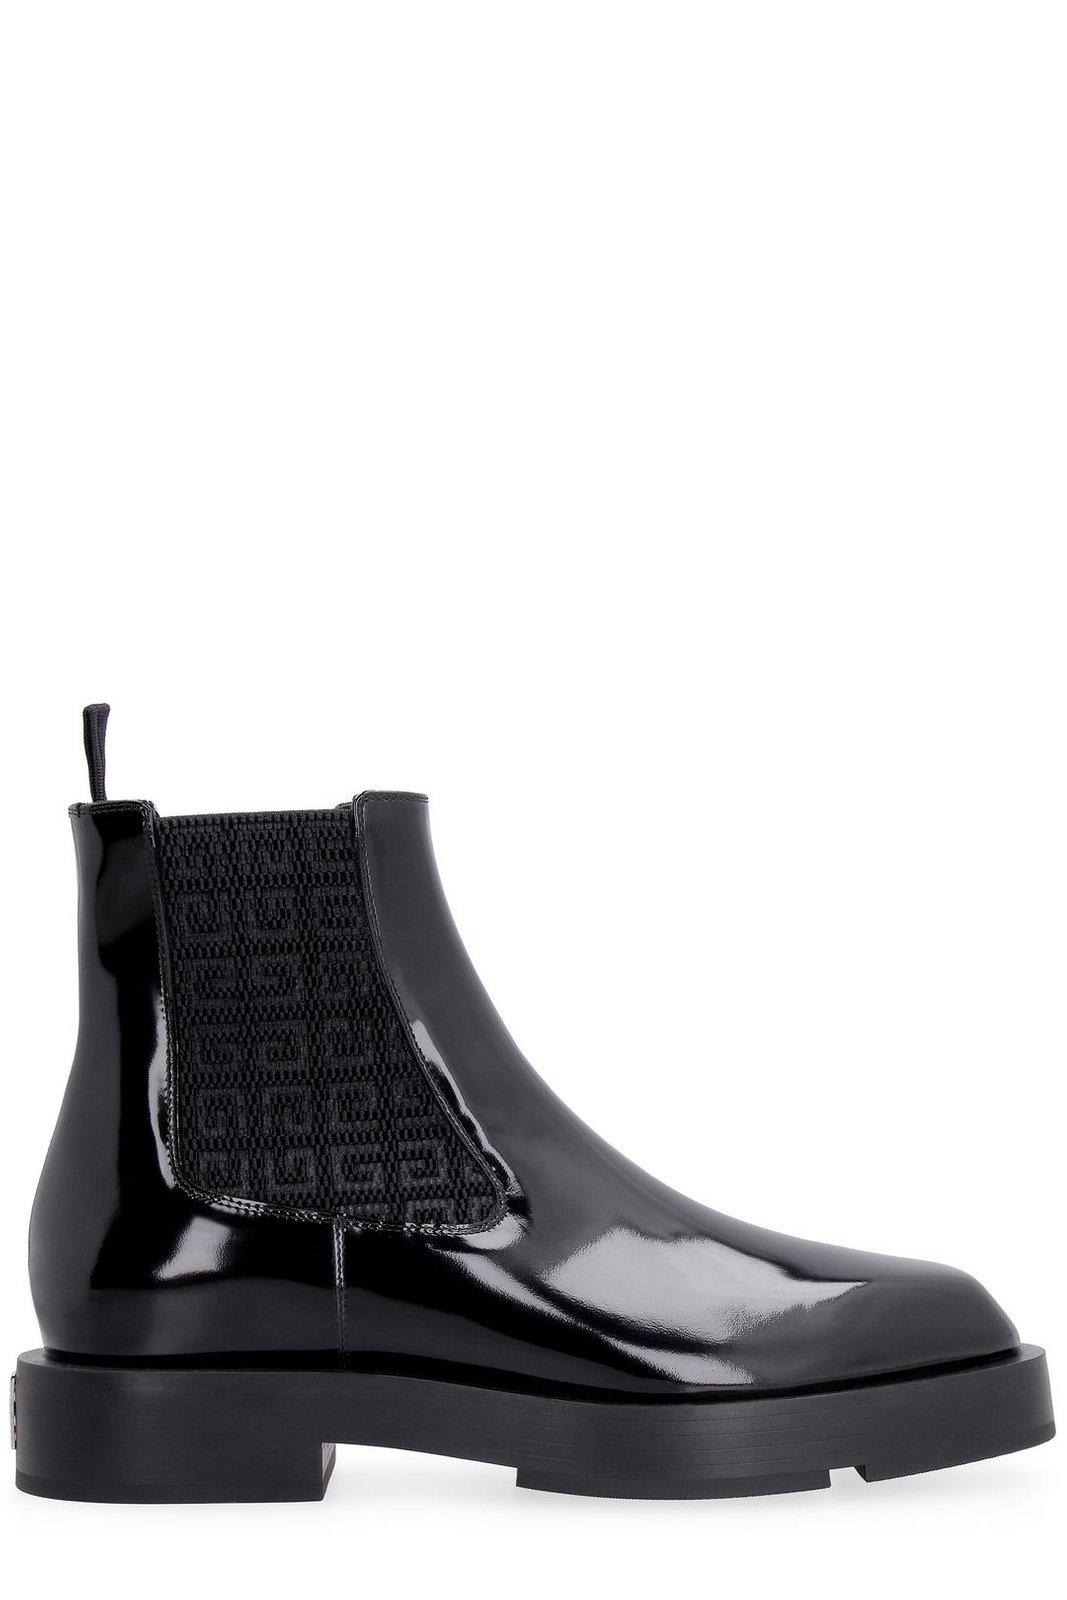 Shop Givenchy Round Toe Ankle Boots In Black